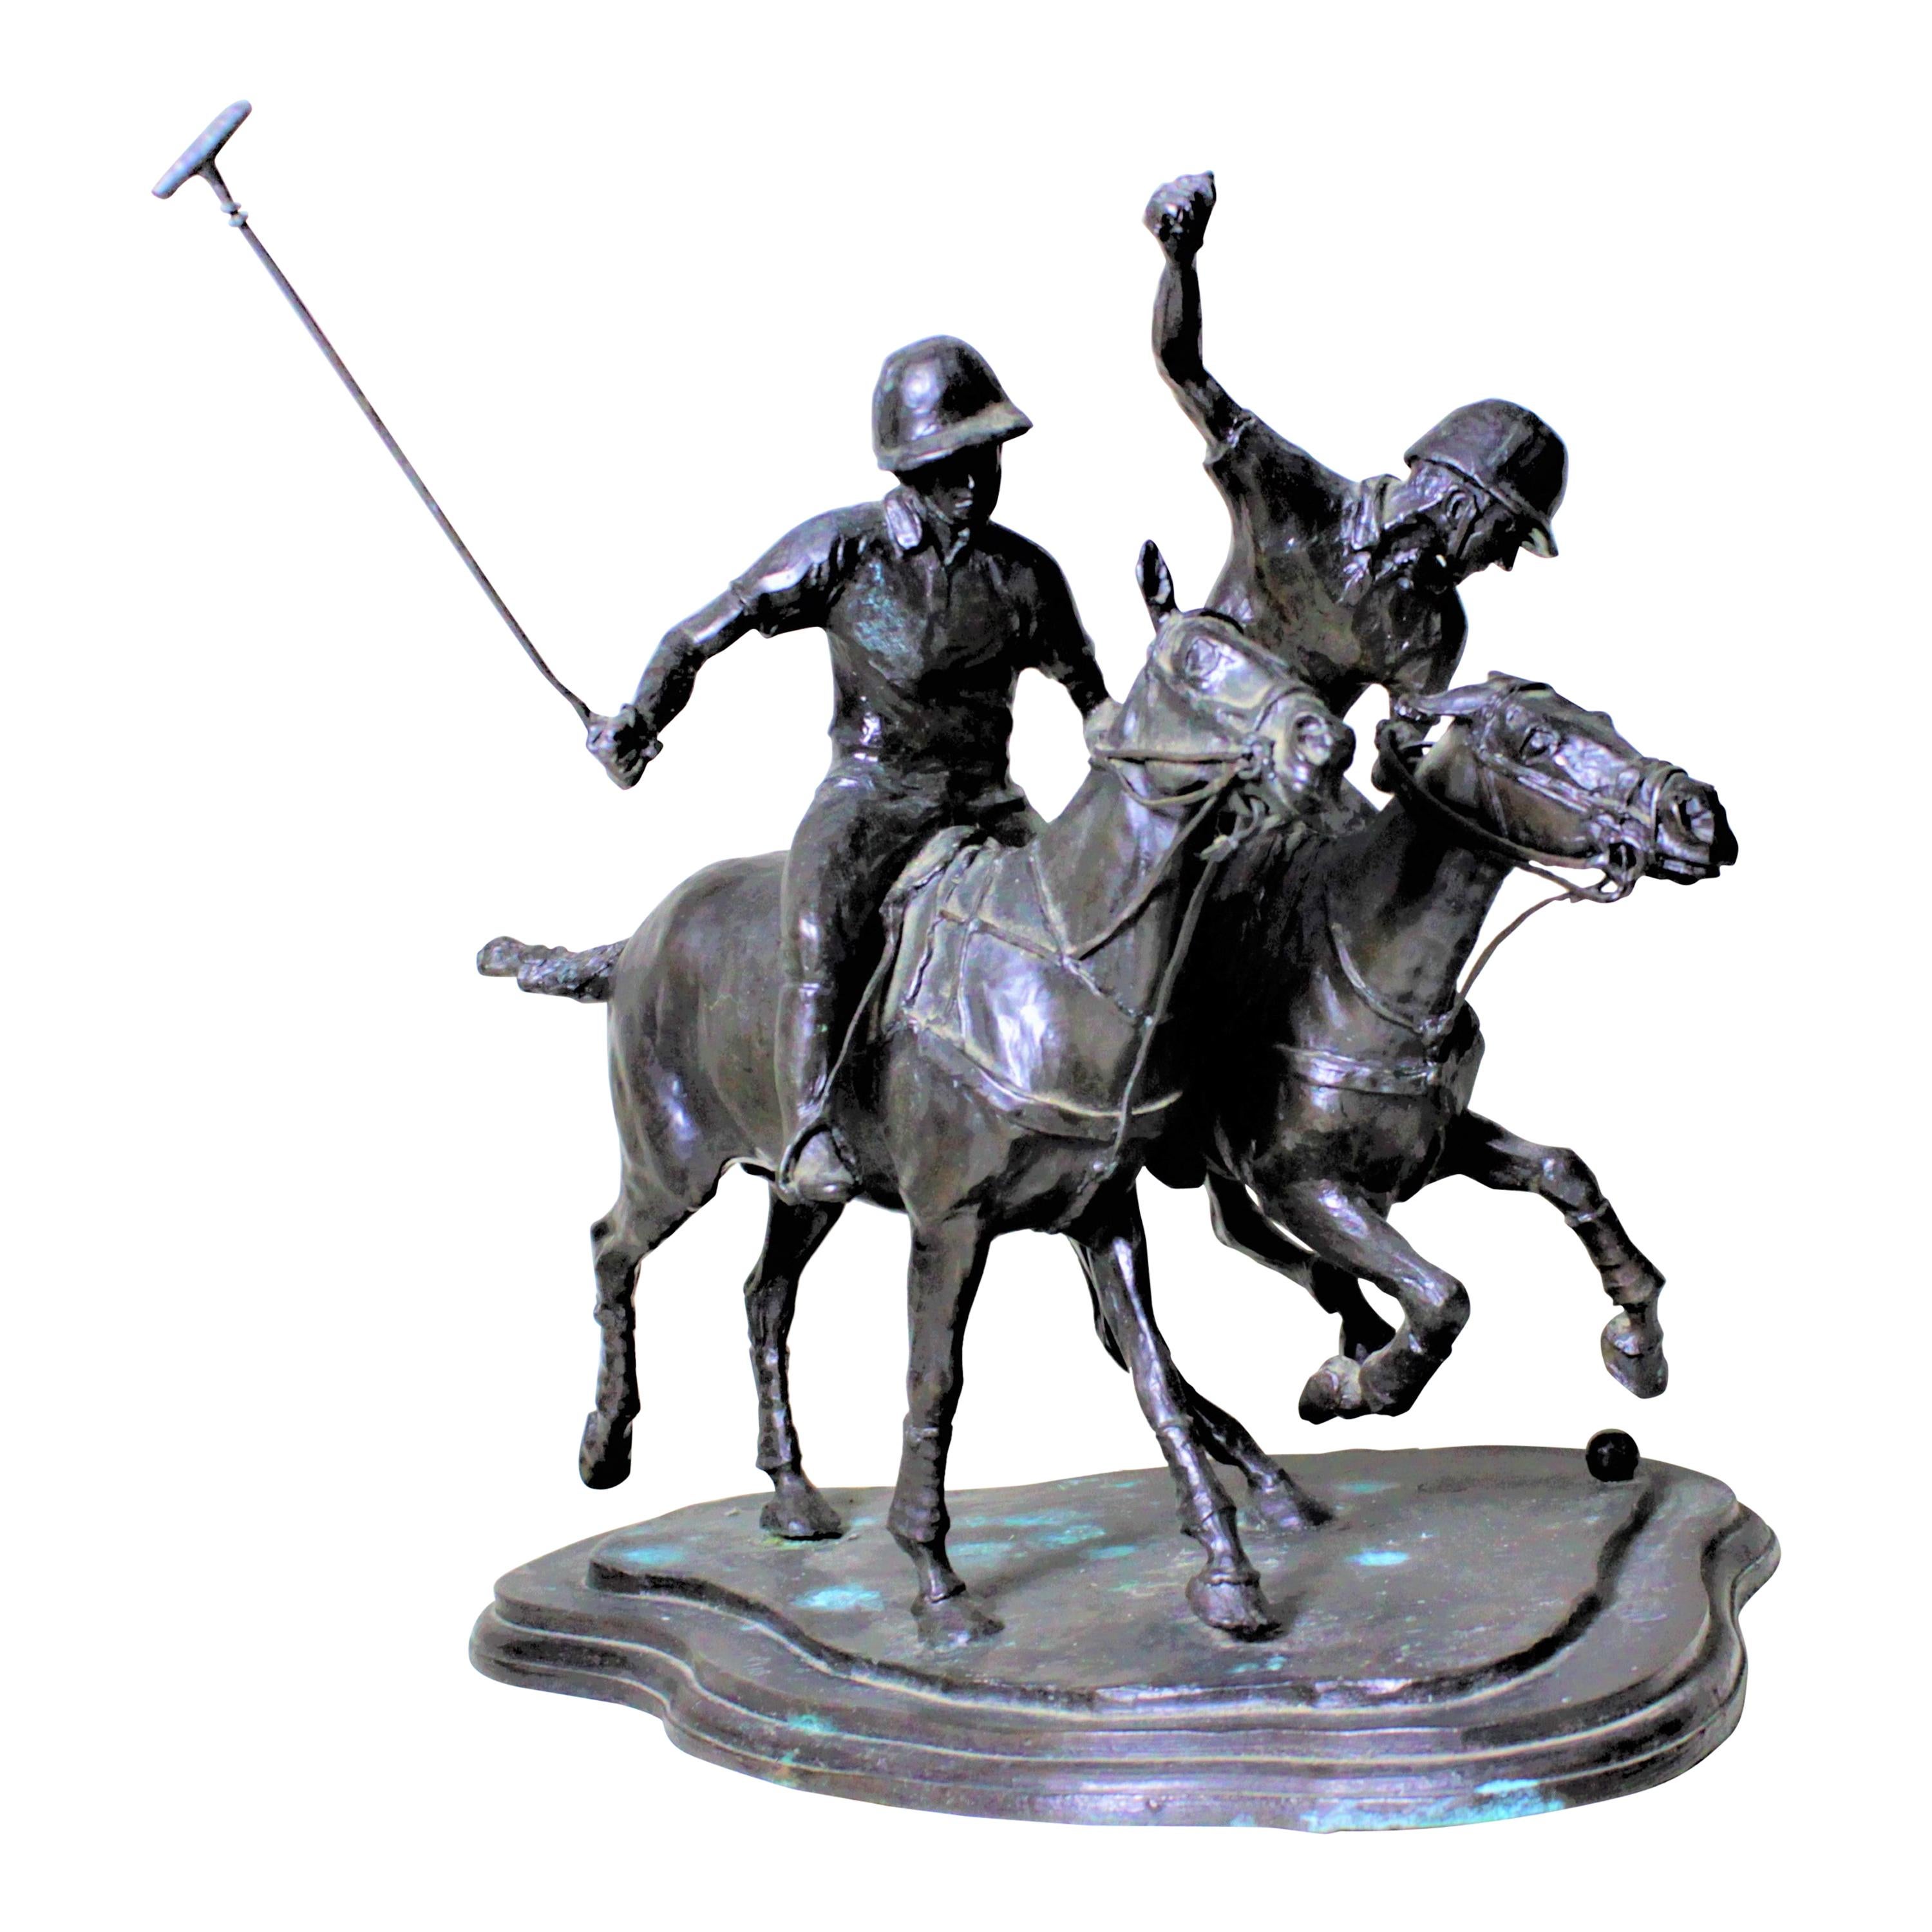 Large Signed Antique Bronze Polo Players Sculpture Titled "The Ride Off"